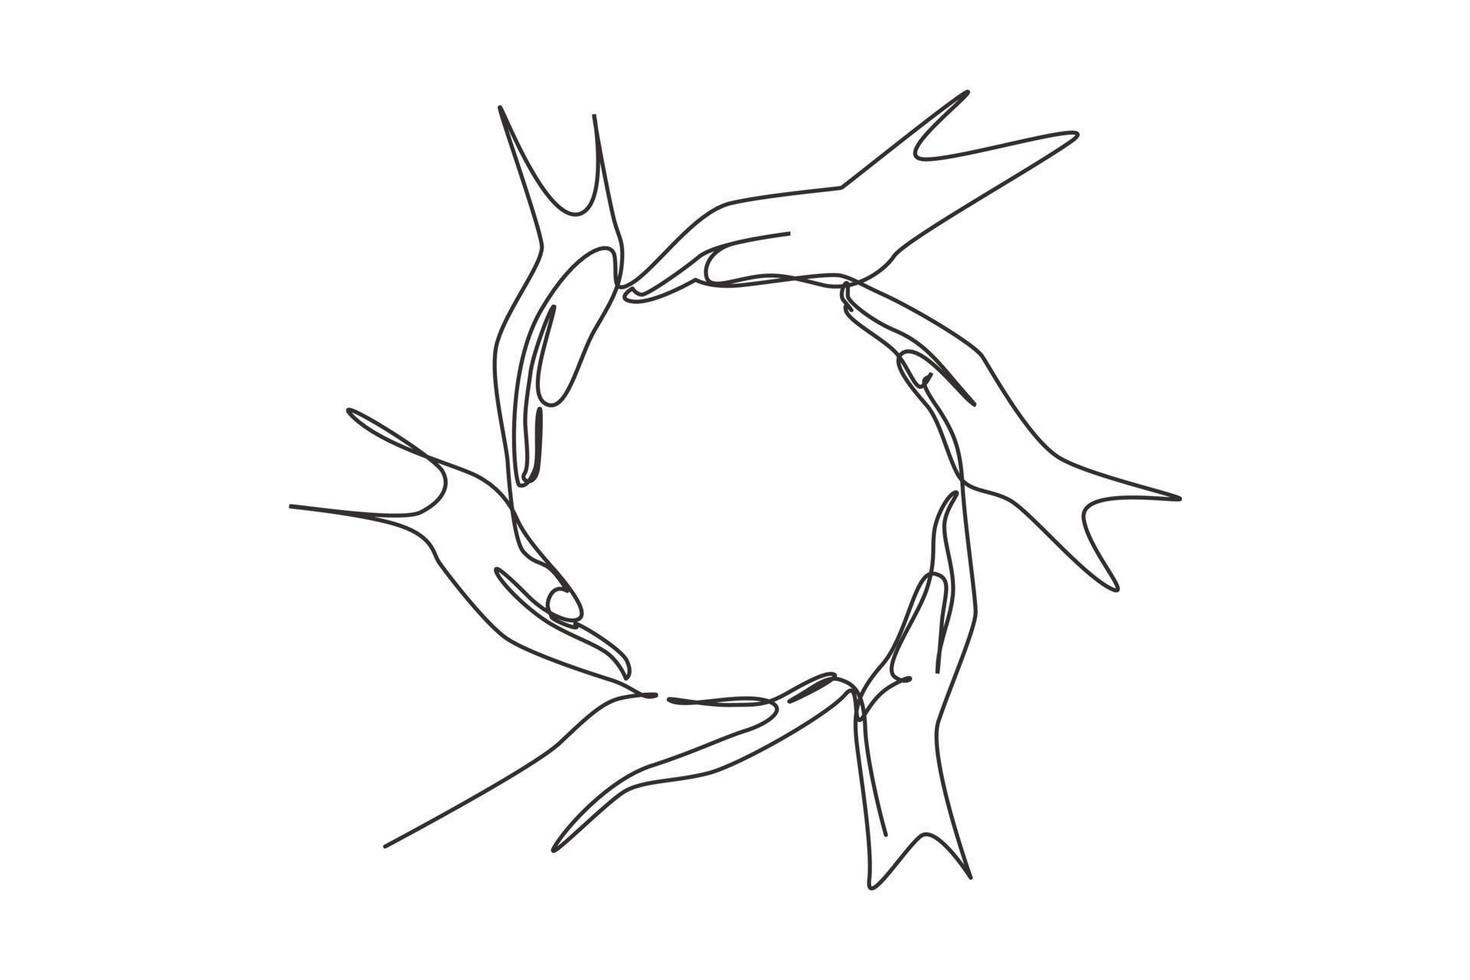 Single continuous line drawing palms and circle hand gesture. Sign or symbol of protection, cooperation, care. Communication with hand gestures. One line draw graphic design vector illustration